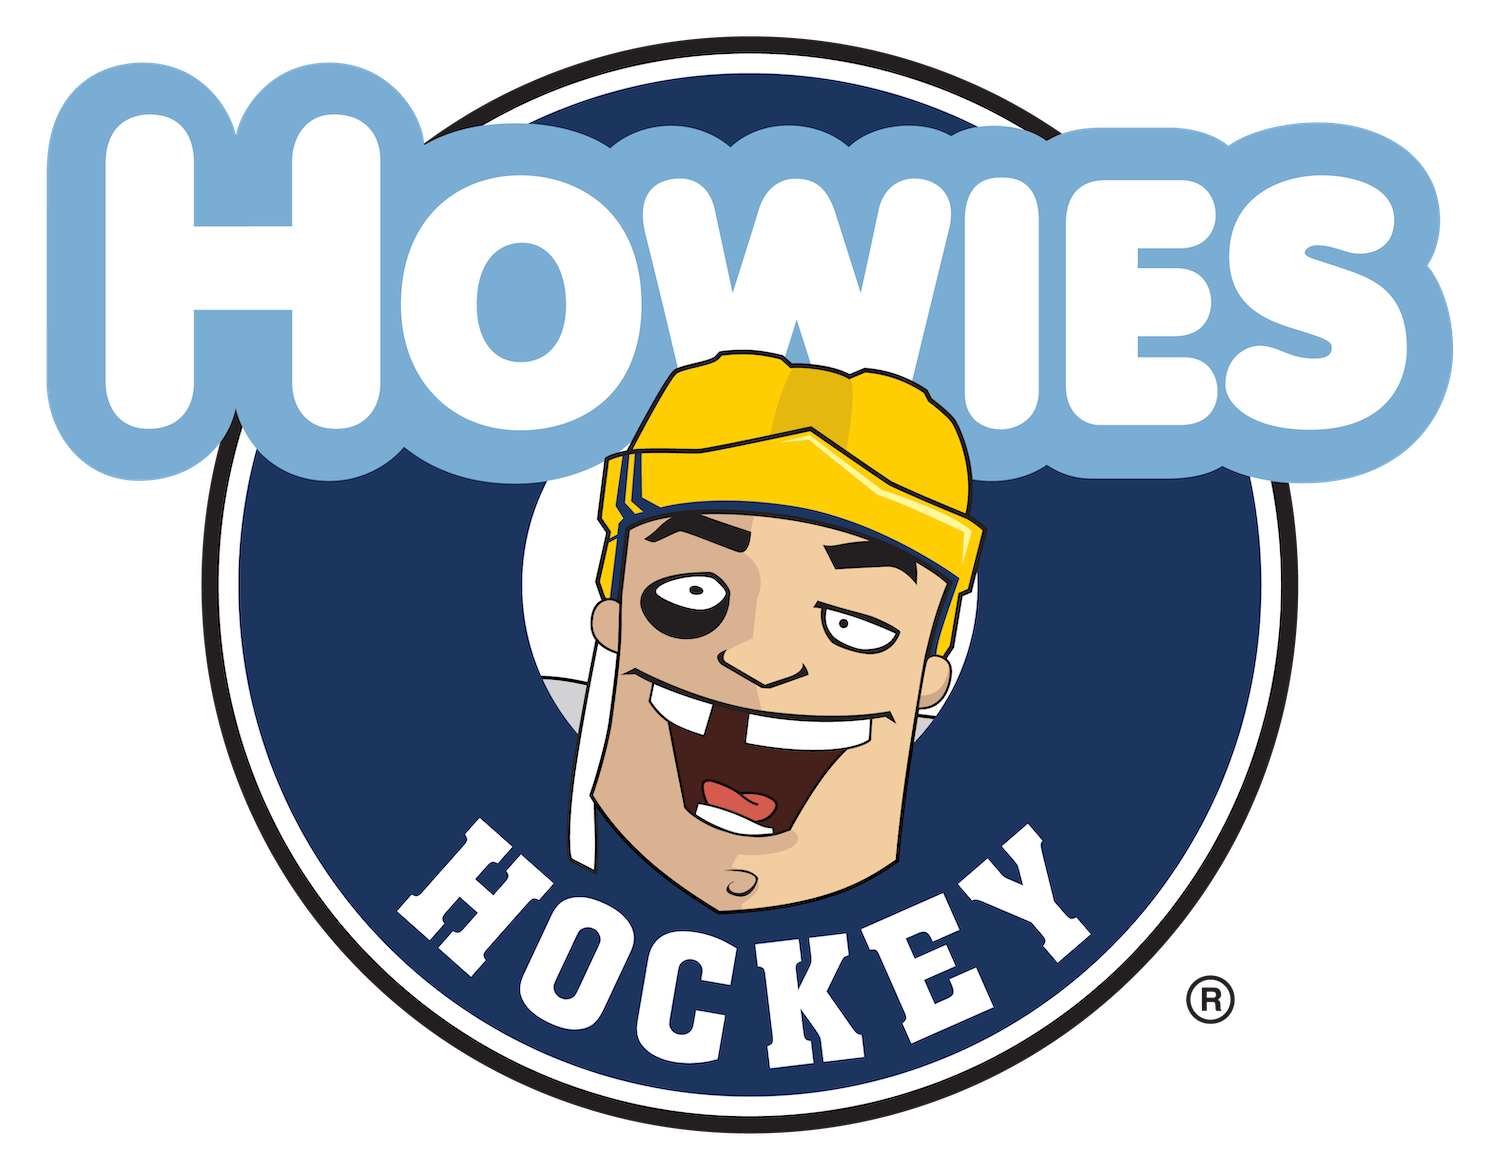 Howies Hockey is the official Jersey provider of the CCM Hockey Showcase